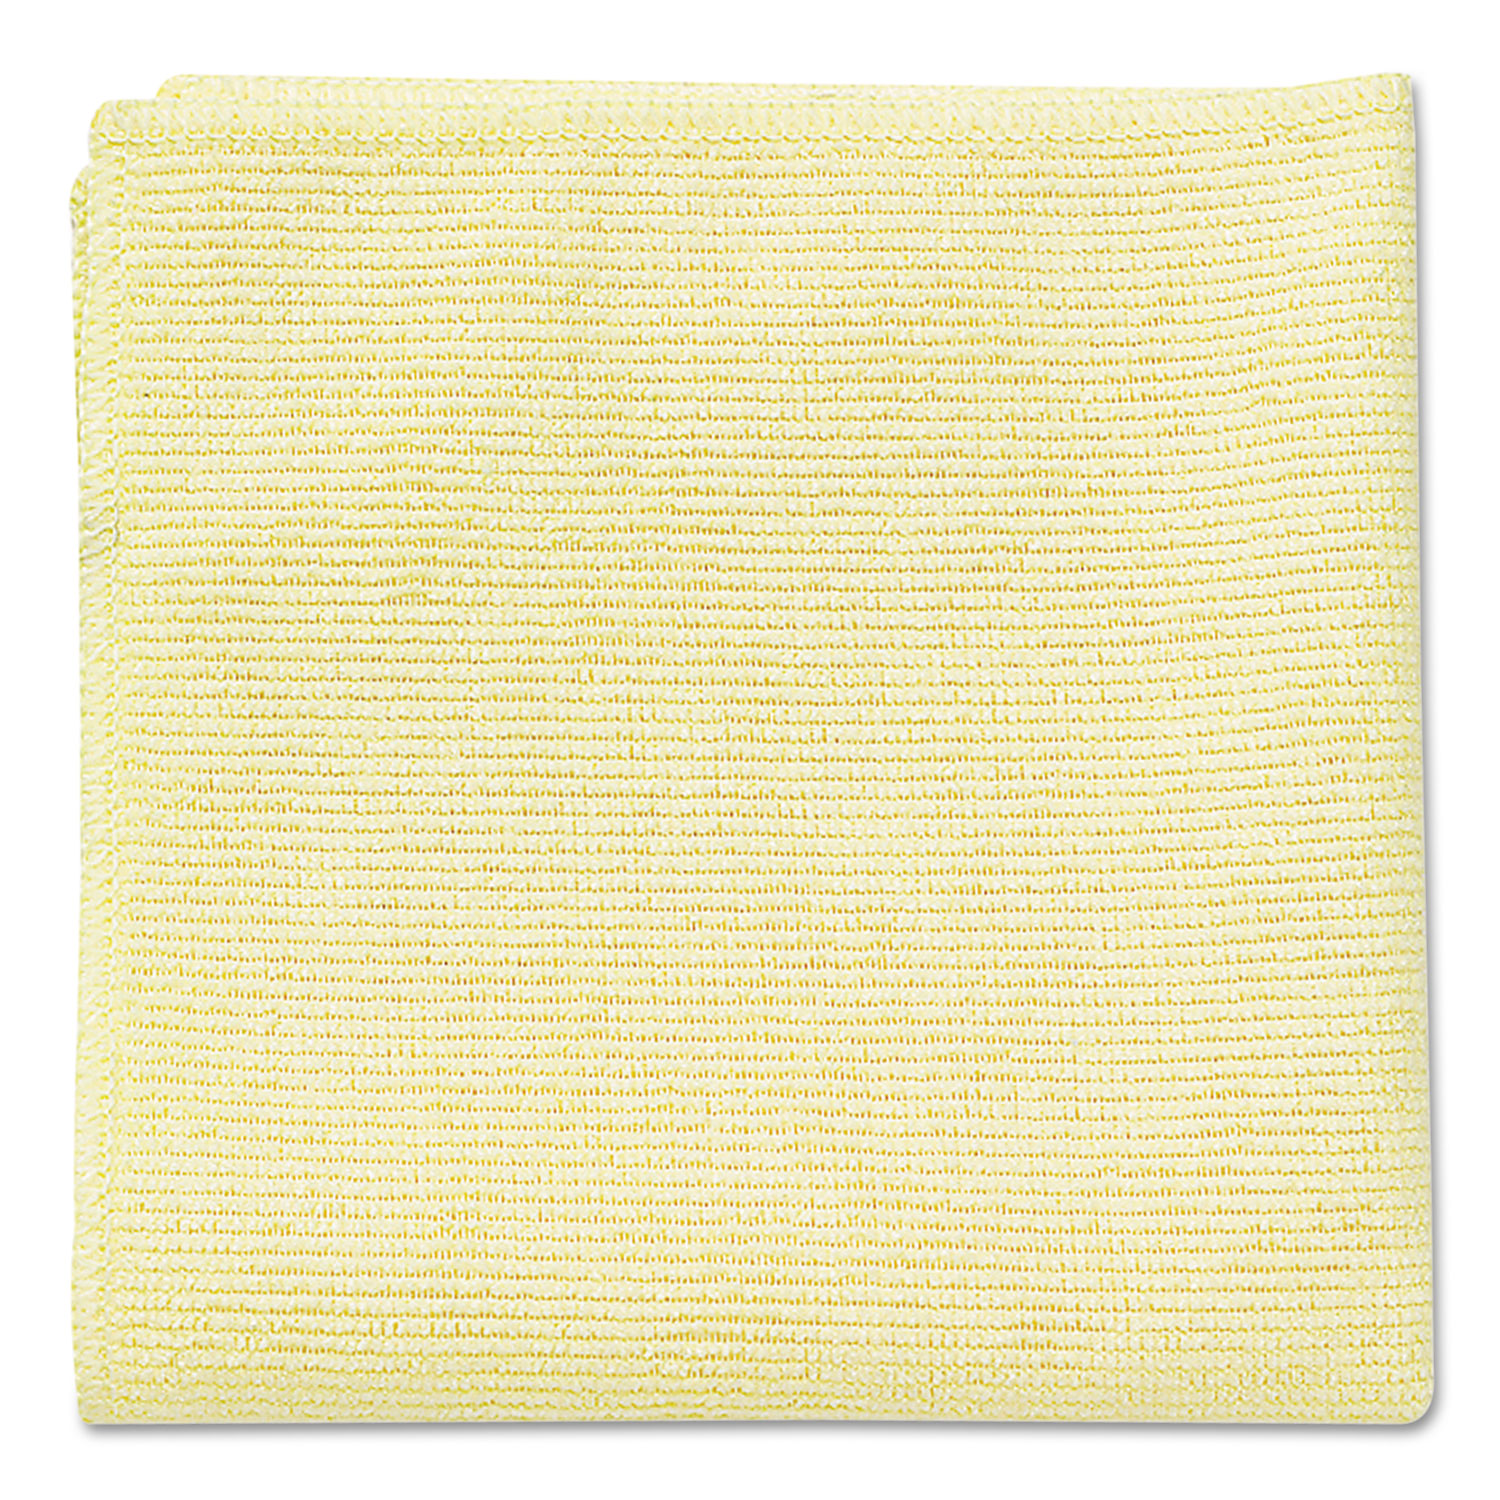 Microfiber Cleaning Cloths, 16 x 16, Yellow, 24/Pack